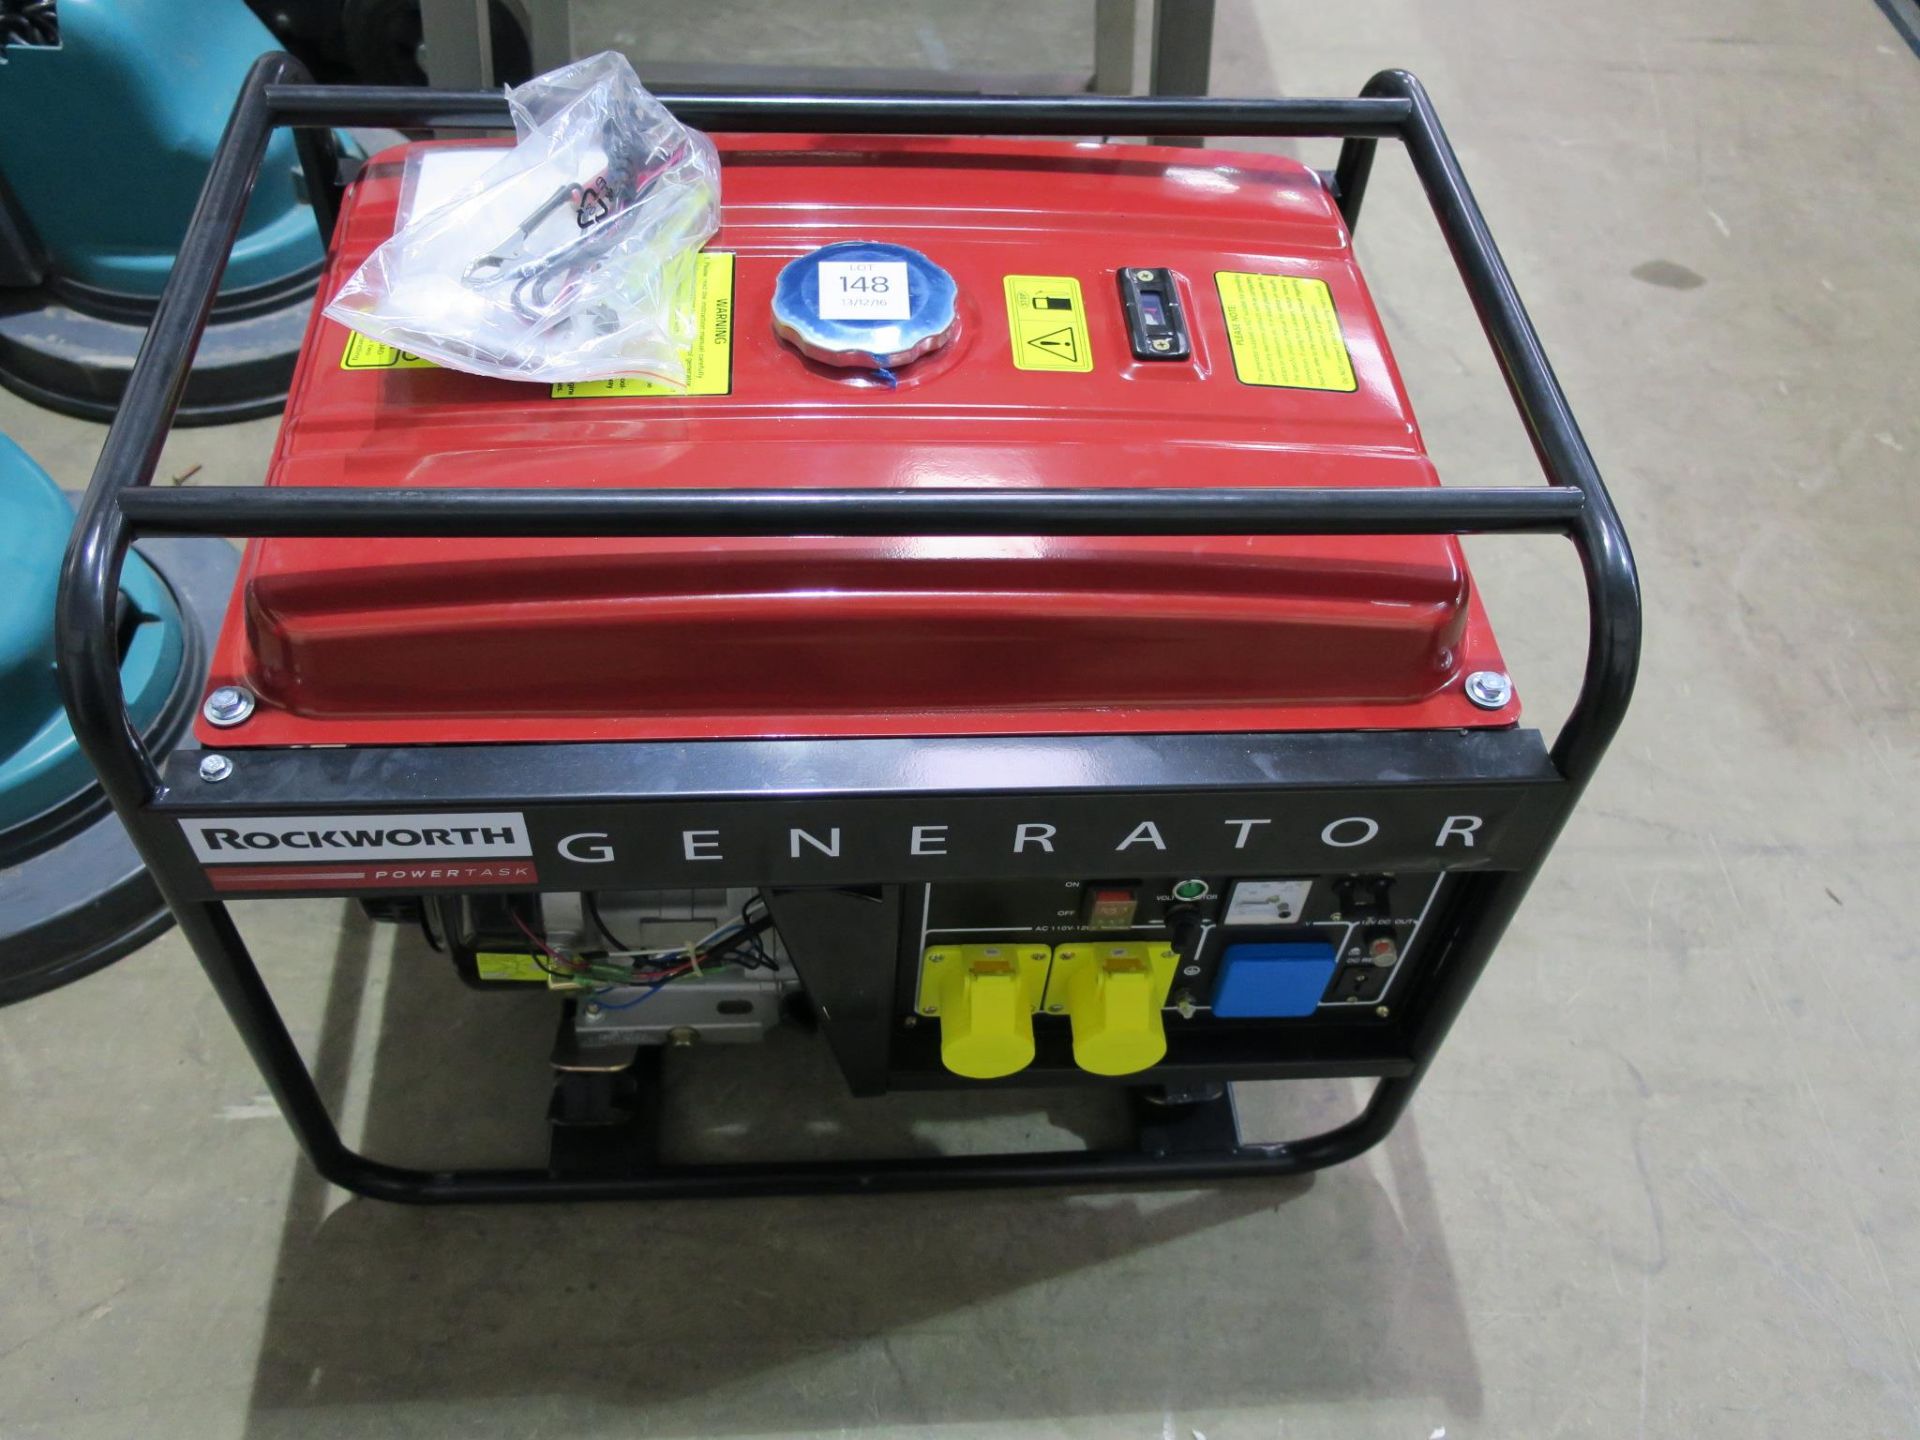 * A Rockworth Powertask 3.8 KVA Cradle Mounted Petrol Generator. 110/220V. Please note there is a £5